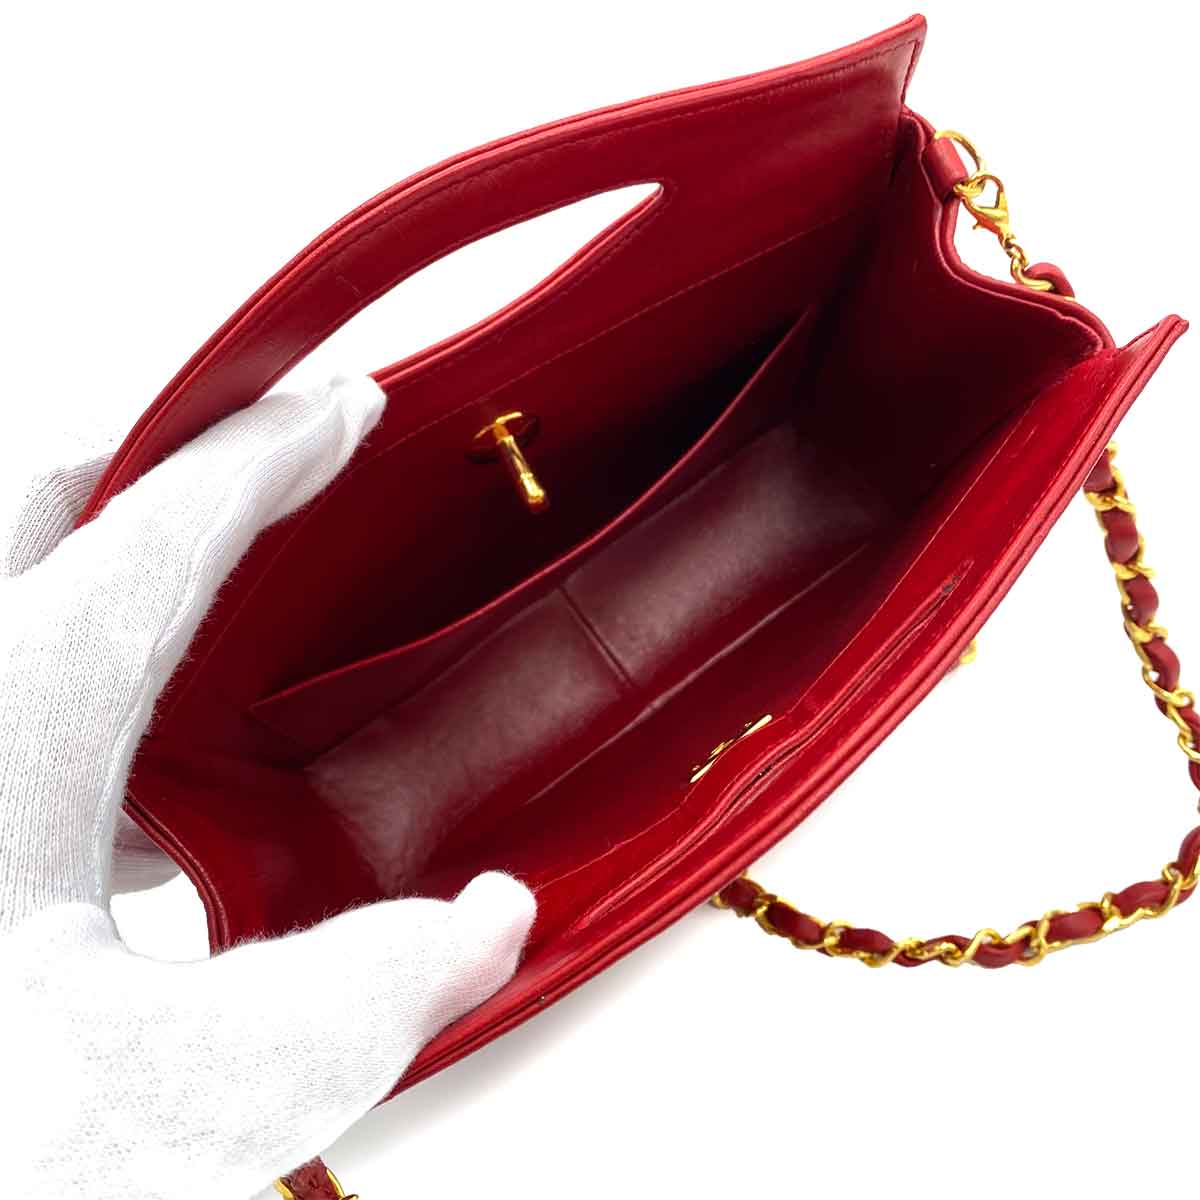 Chanel Chanel Vintage Top Handle Tote Red Lambskin GHW #1
 90232185